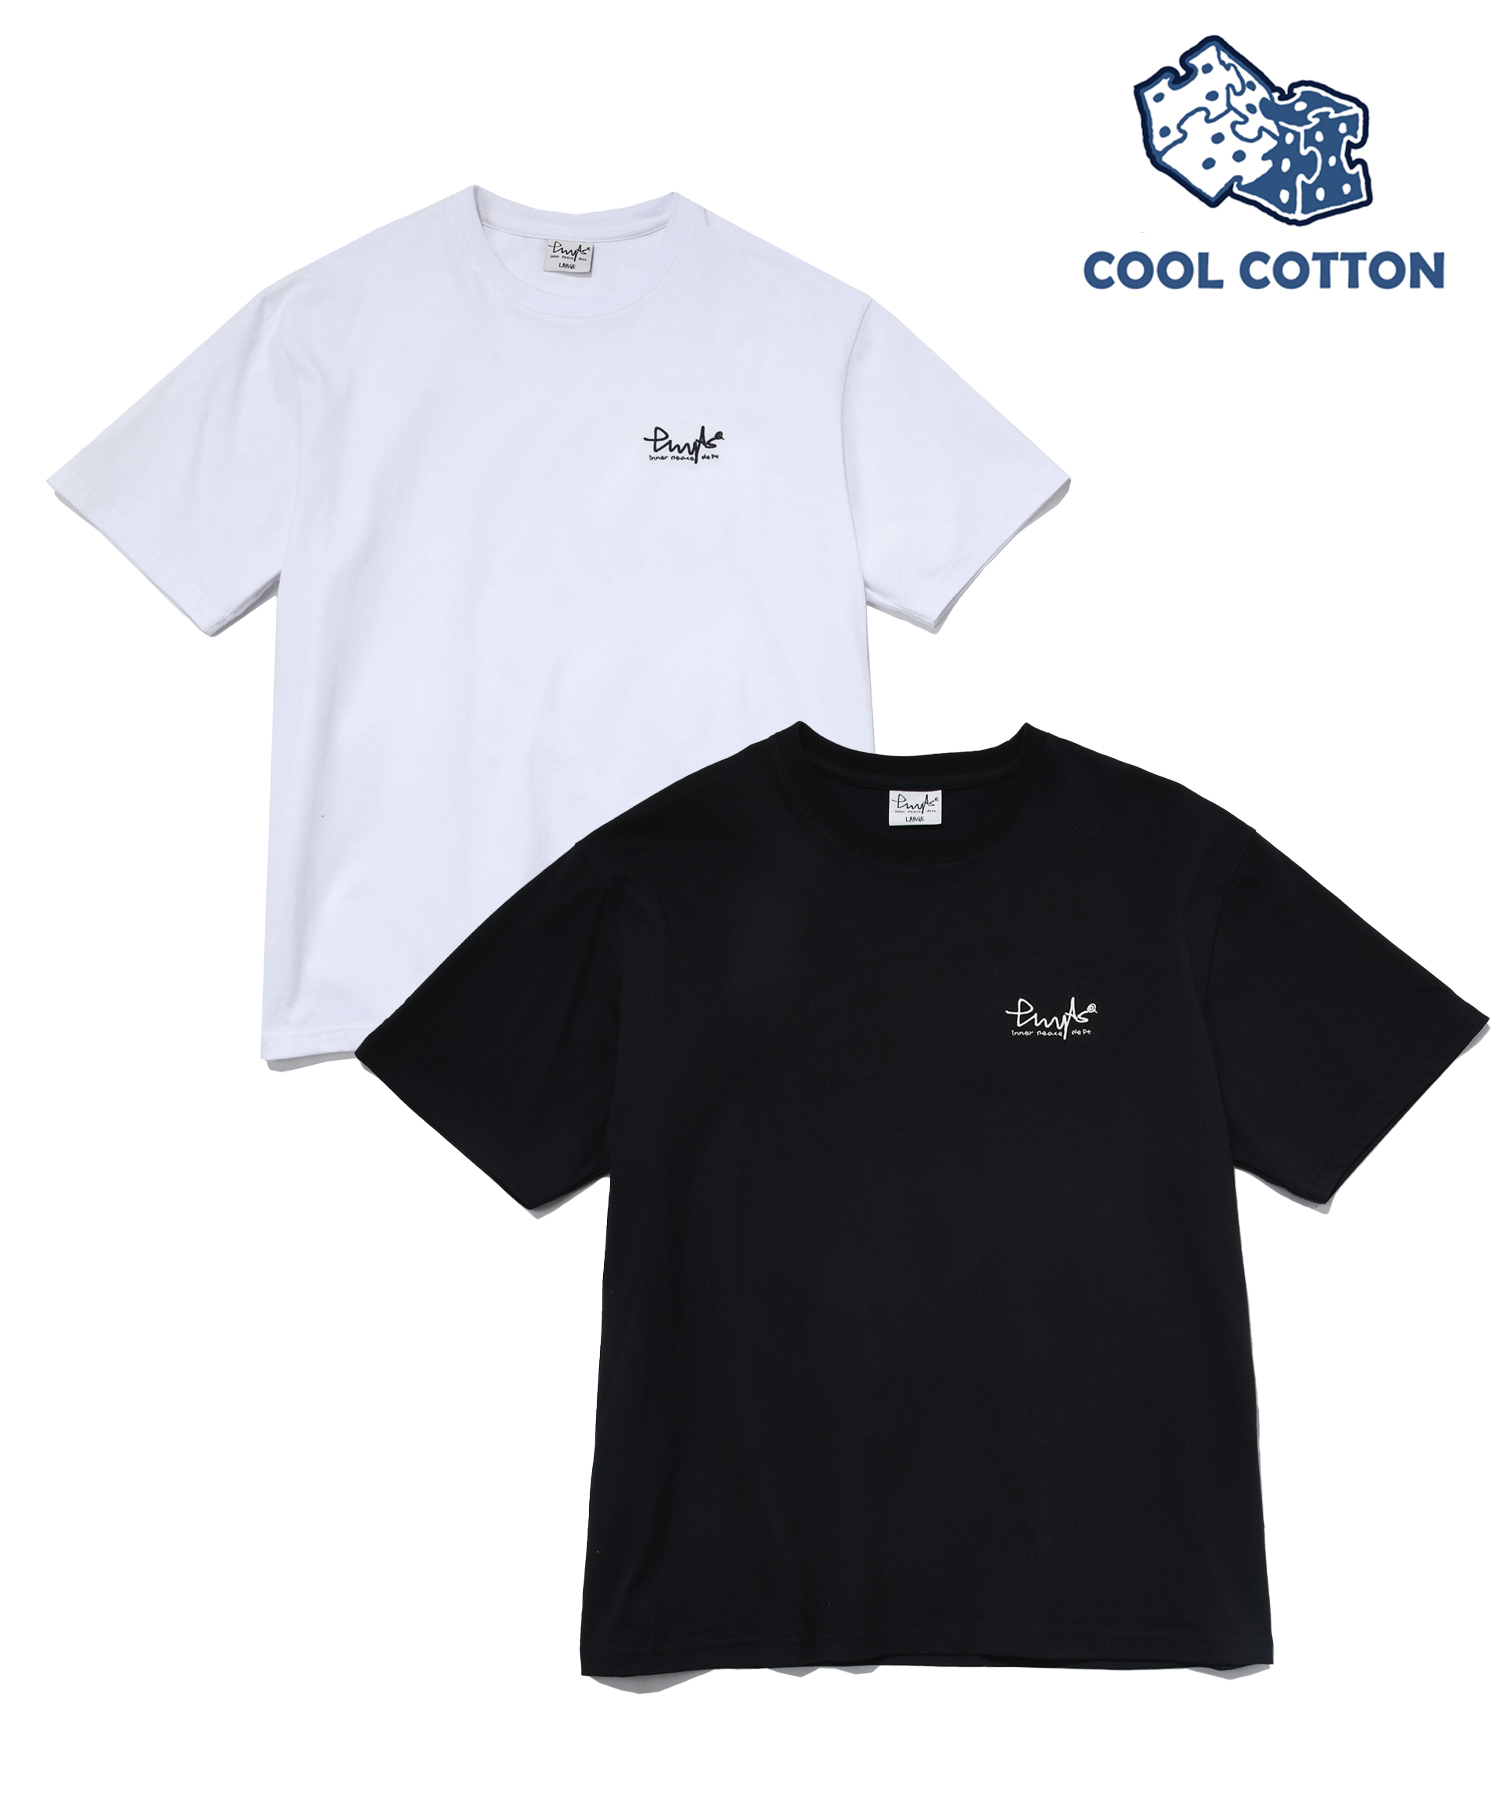 PHYPS® 2PACK COOL COTTON SMALL LOGO SS WHITE / BLACK